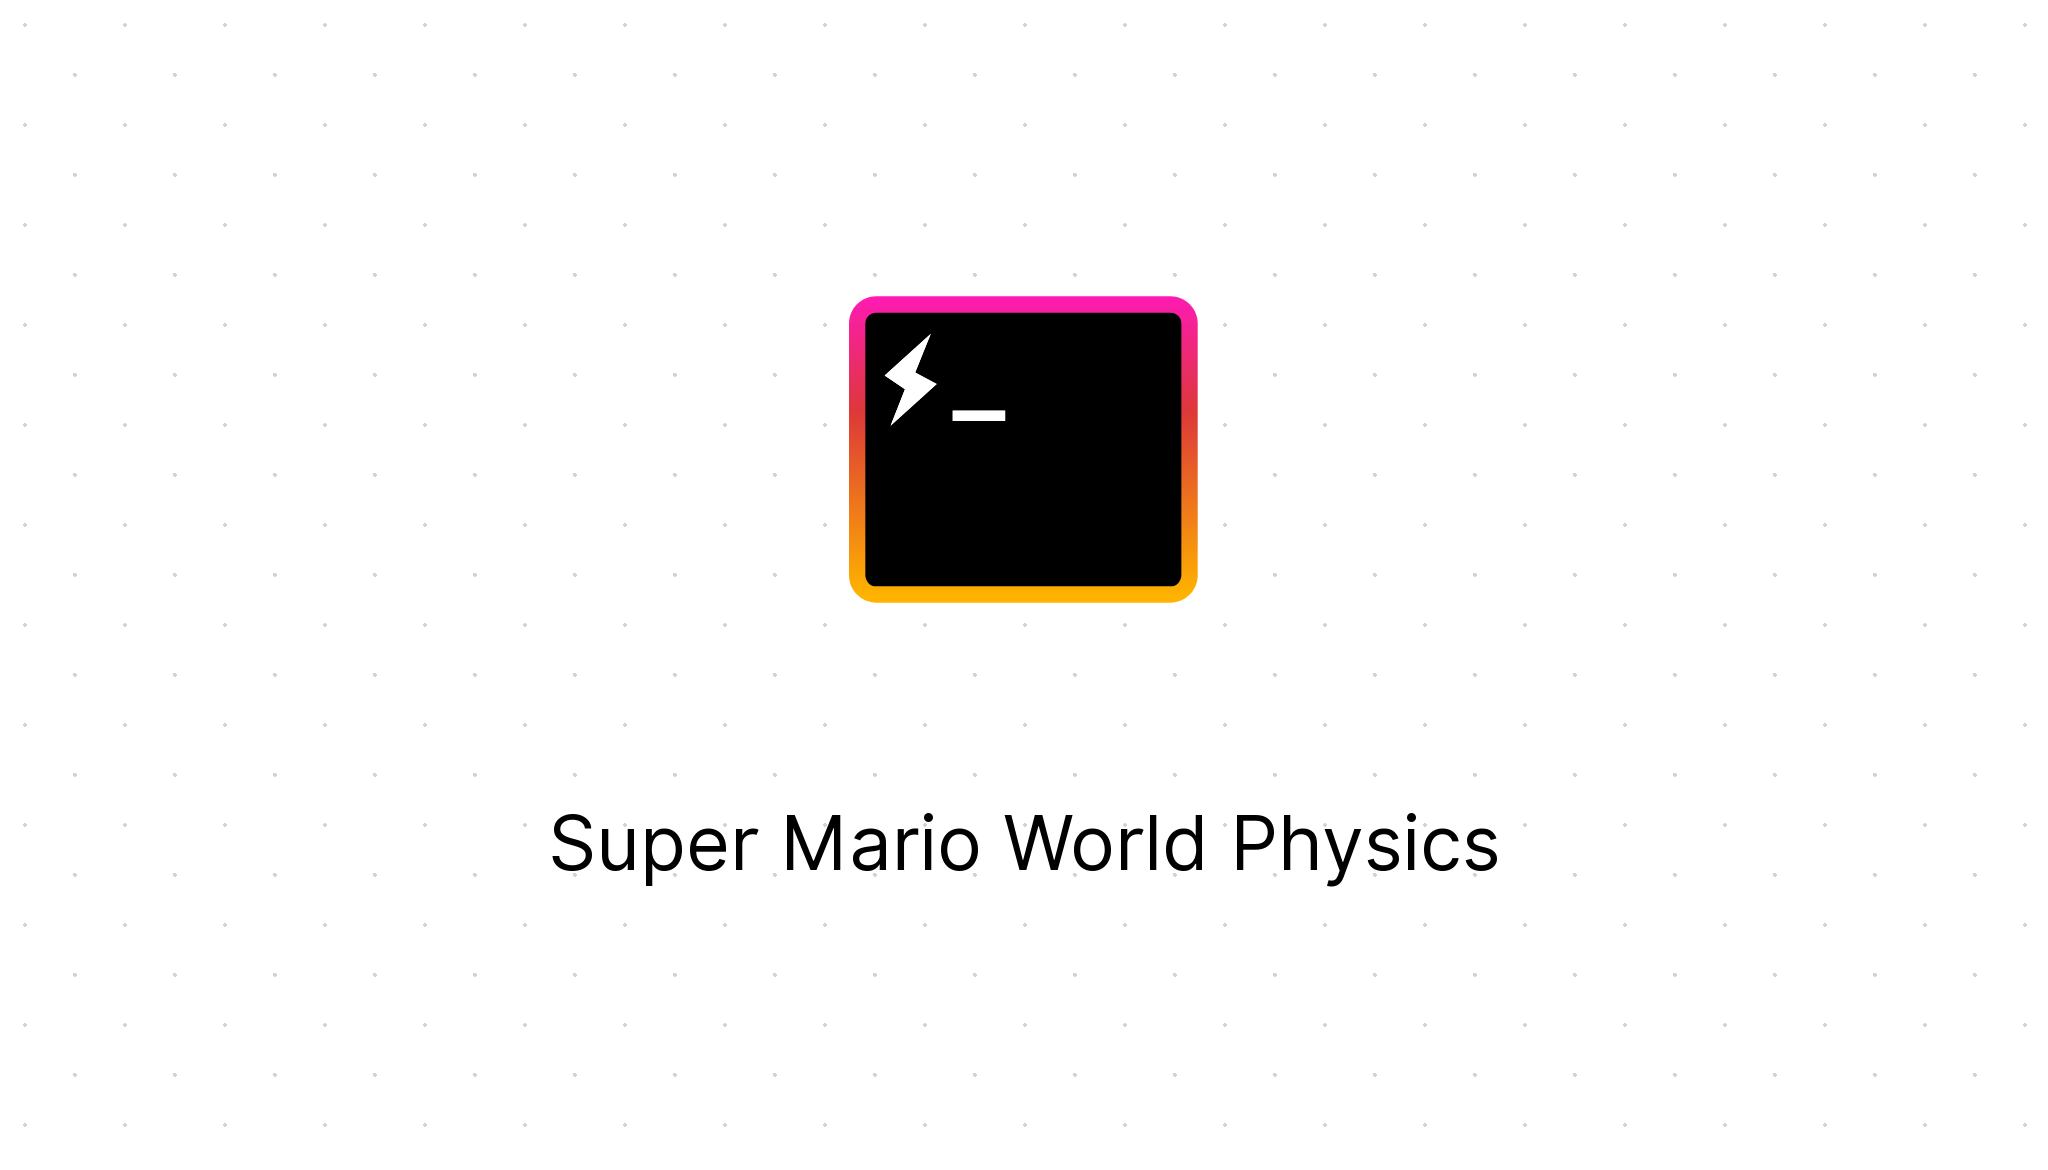 acceleration due to gravity mario